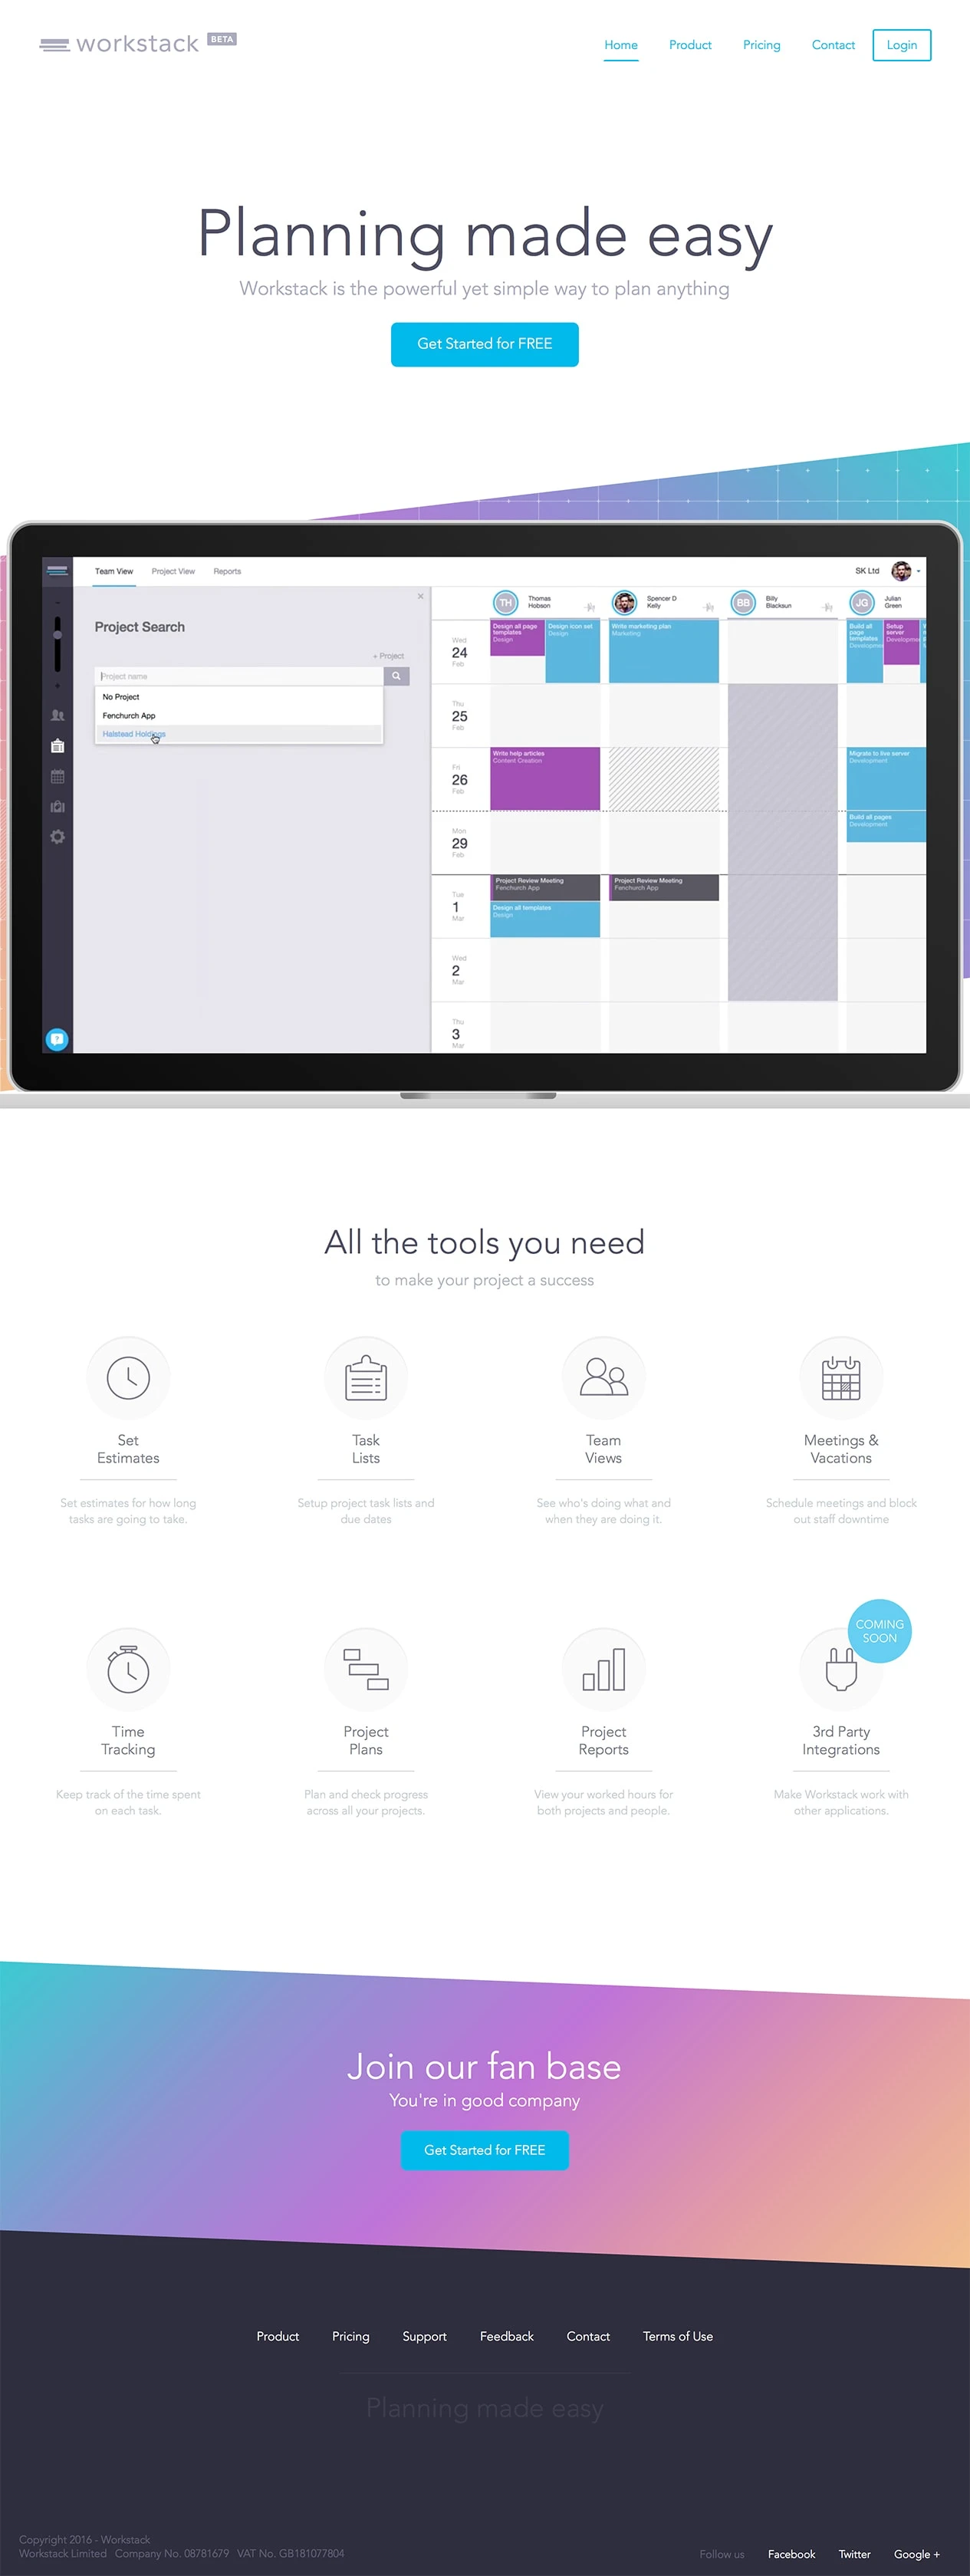 Workstack 2.0 Landing Page Example: Workstack is the powerful and simple way to plan anything. Project plans, team calendars, task lists and time tracking all in one easy to use tool.